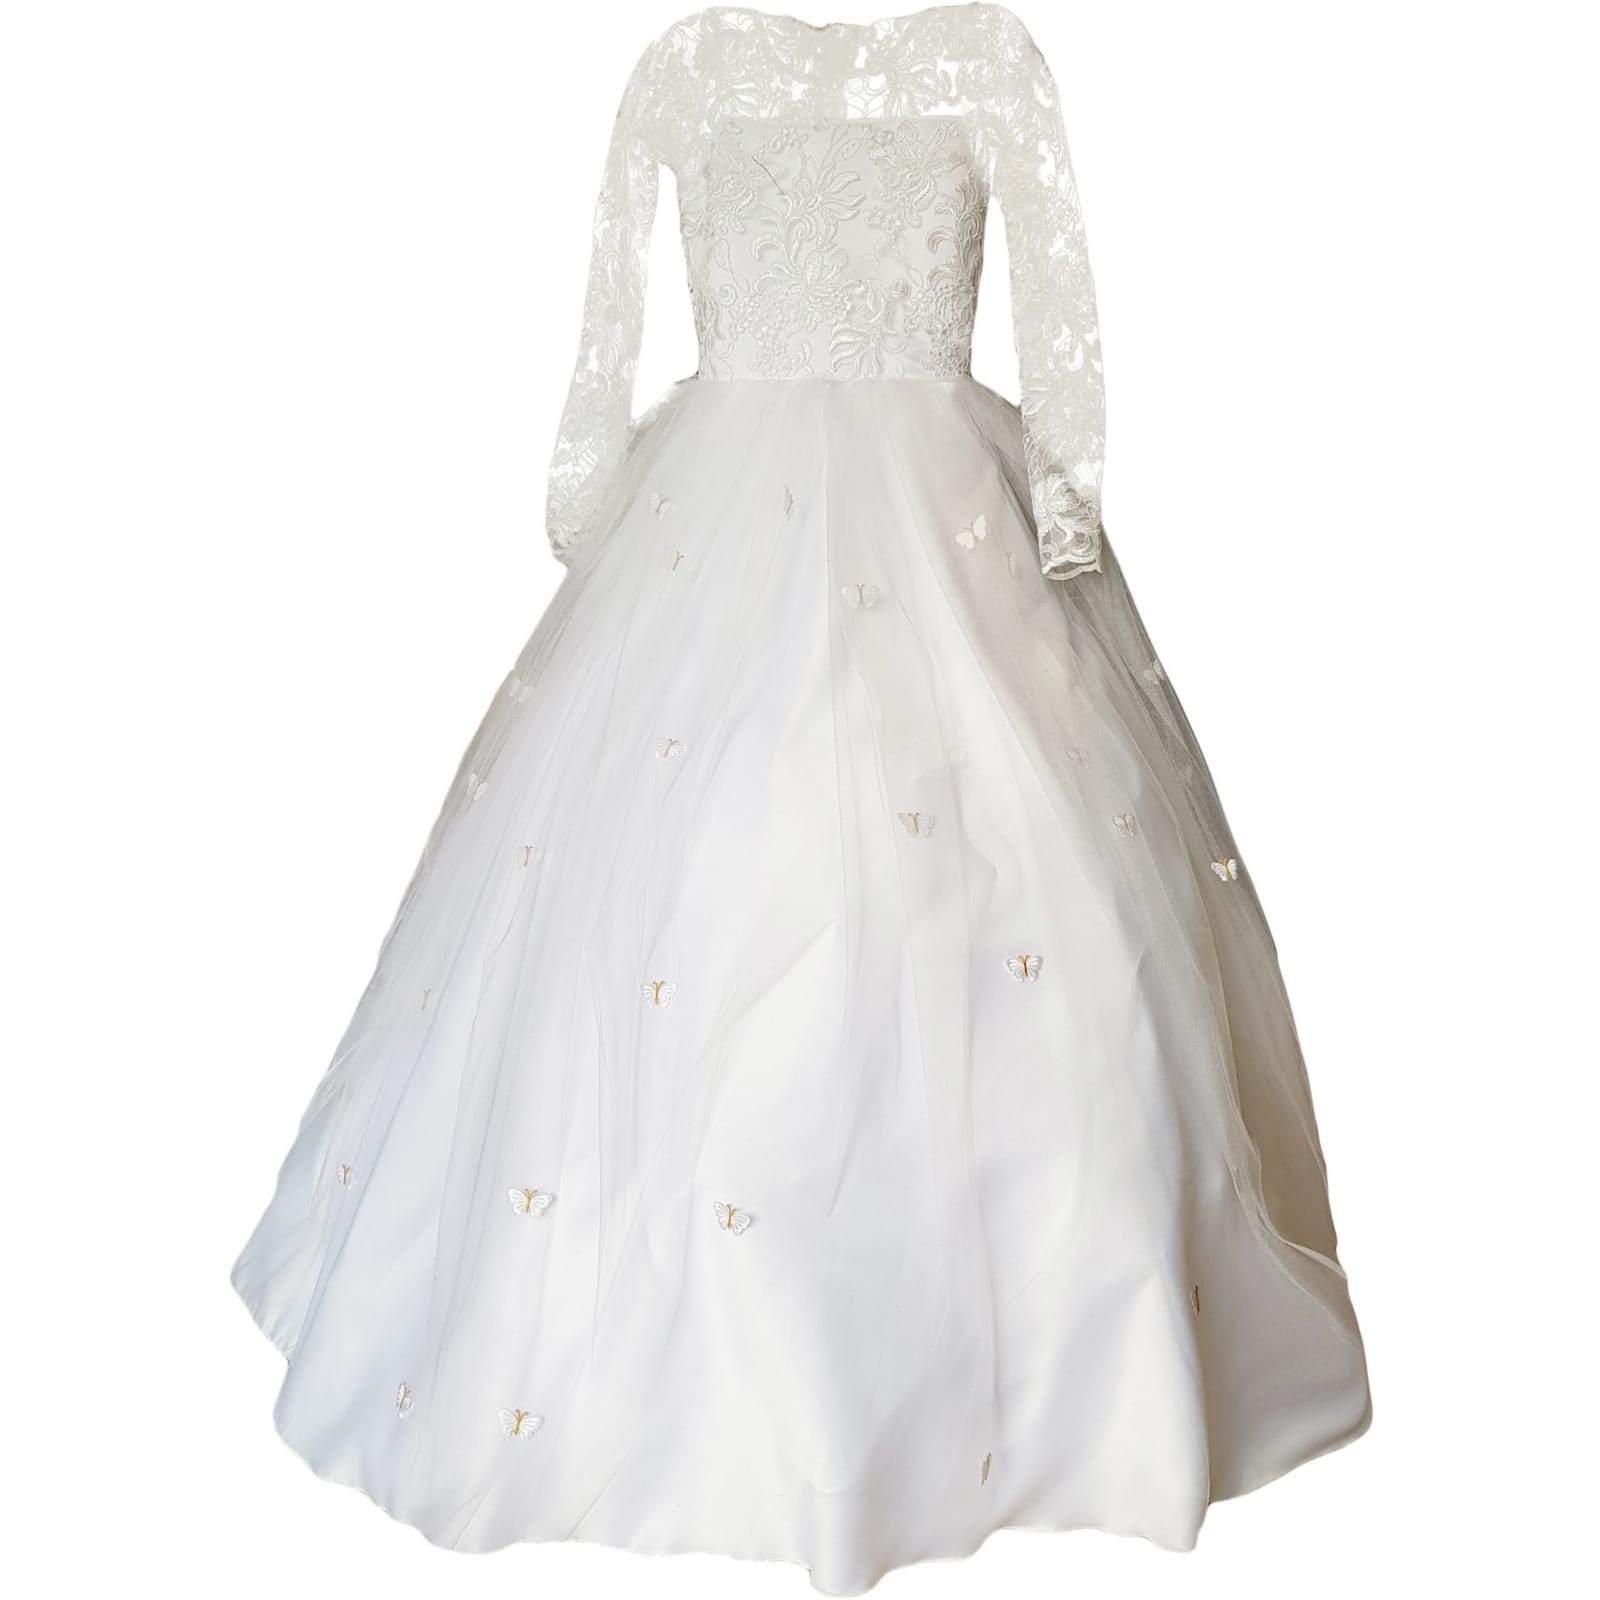 White holy communion ball gown dress 5 white holy communion ball gown dress. With a lace bodice. Long lace sleeves. Holy communion dress detailed with butterflies.